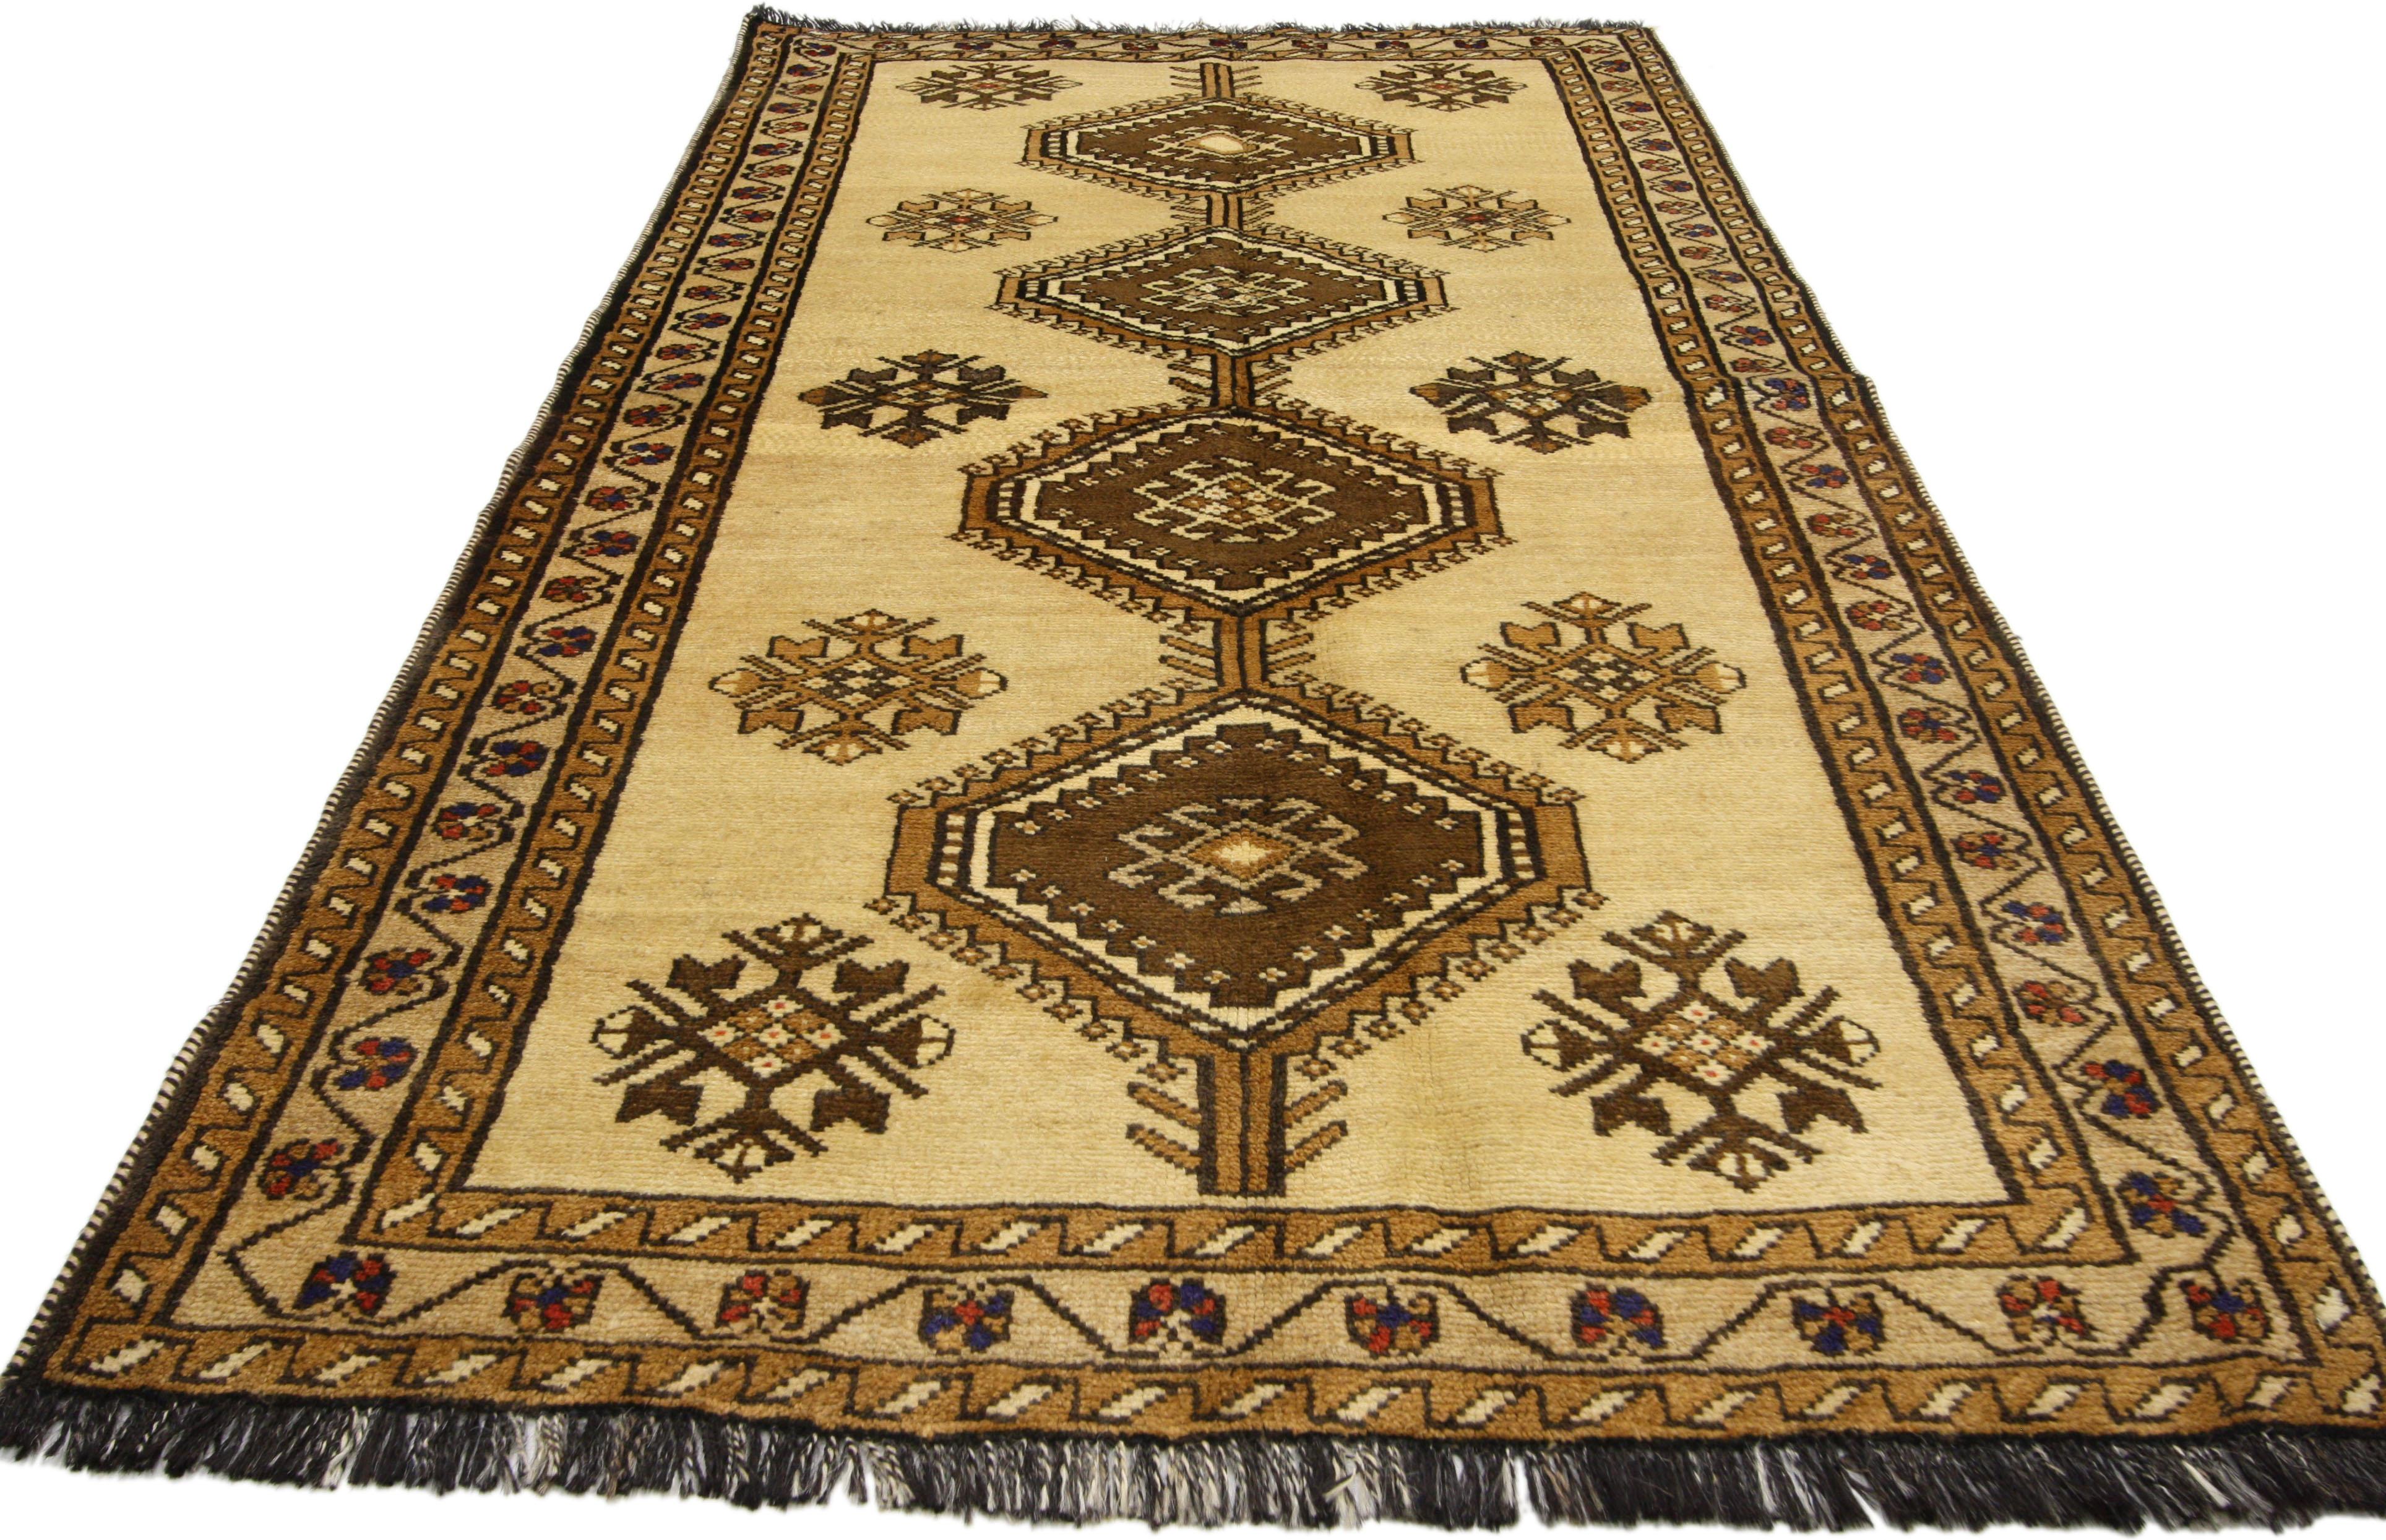 75052 Vintage Persian Shiraz Tribal Accent Rug with Mid-Century Modern Style - 3'9